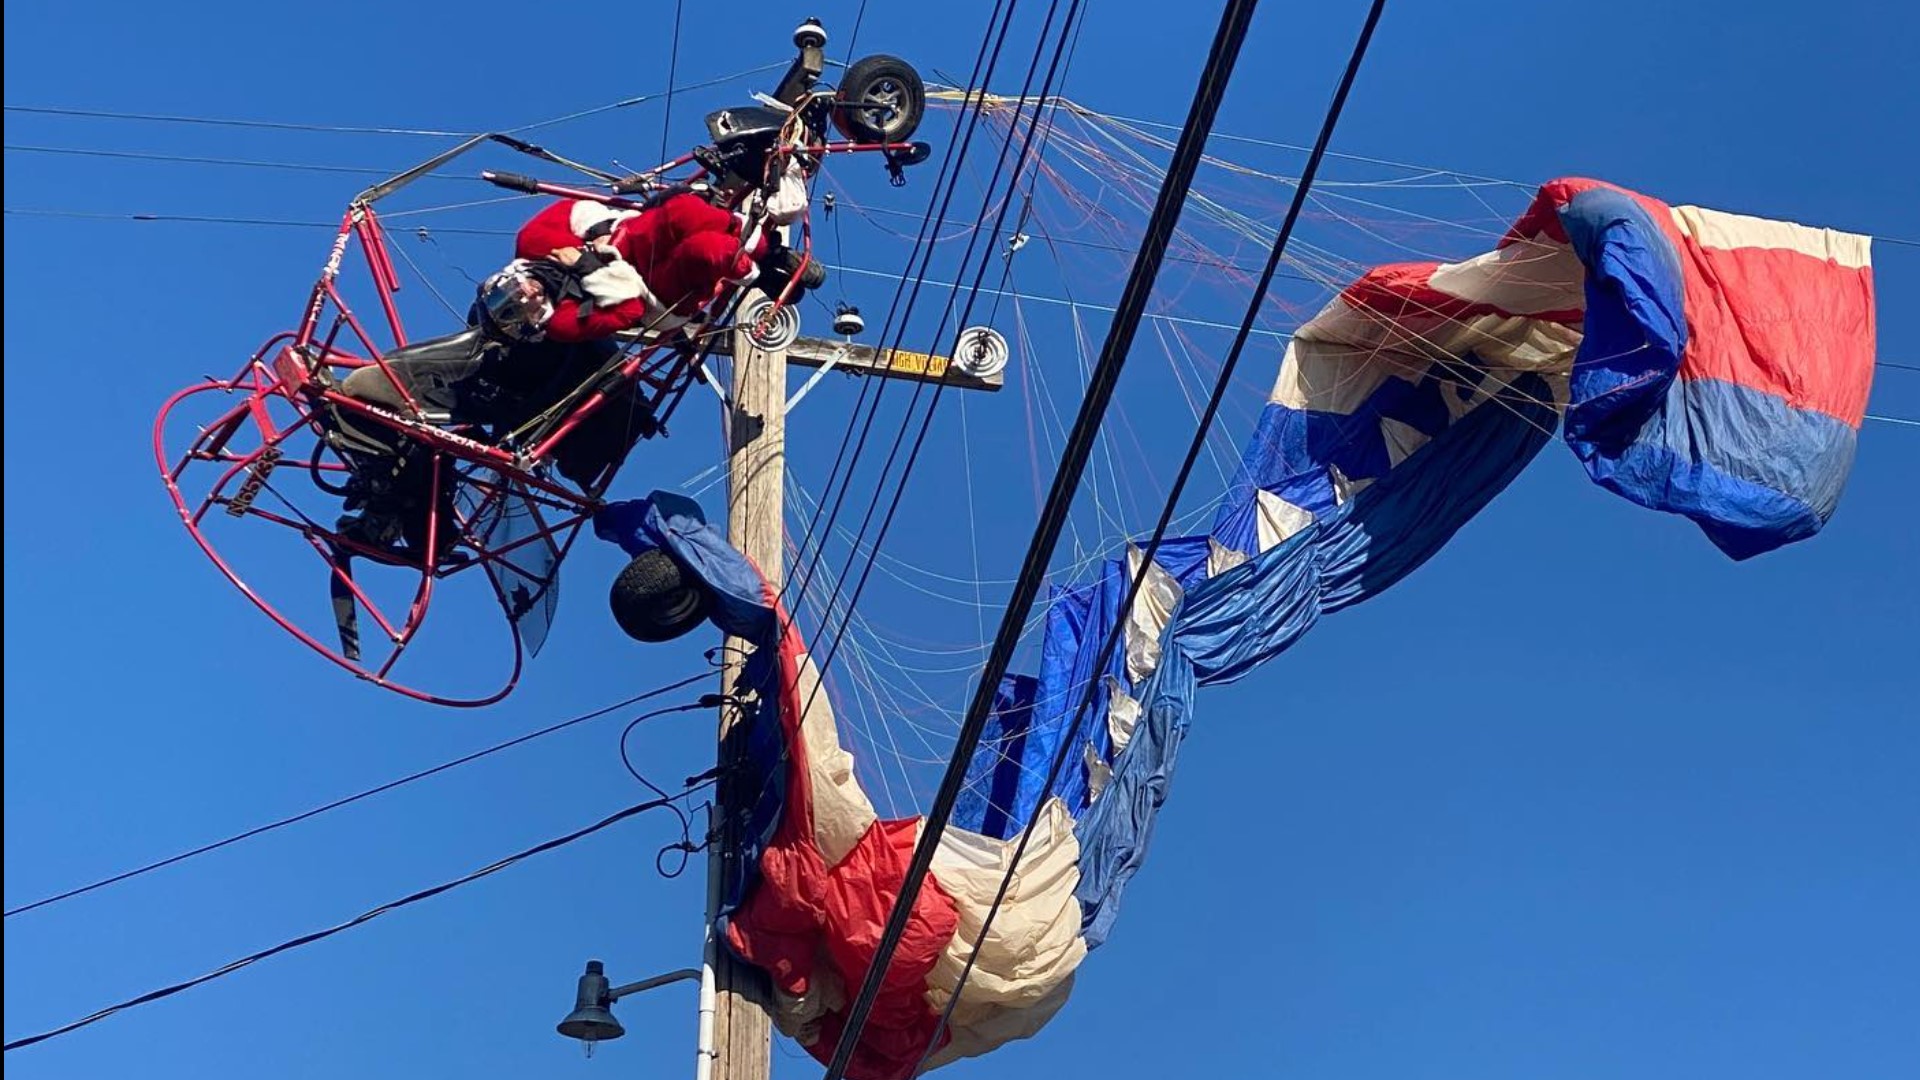 A parachuting Santa was rescued in Rio Linda on Sunday.